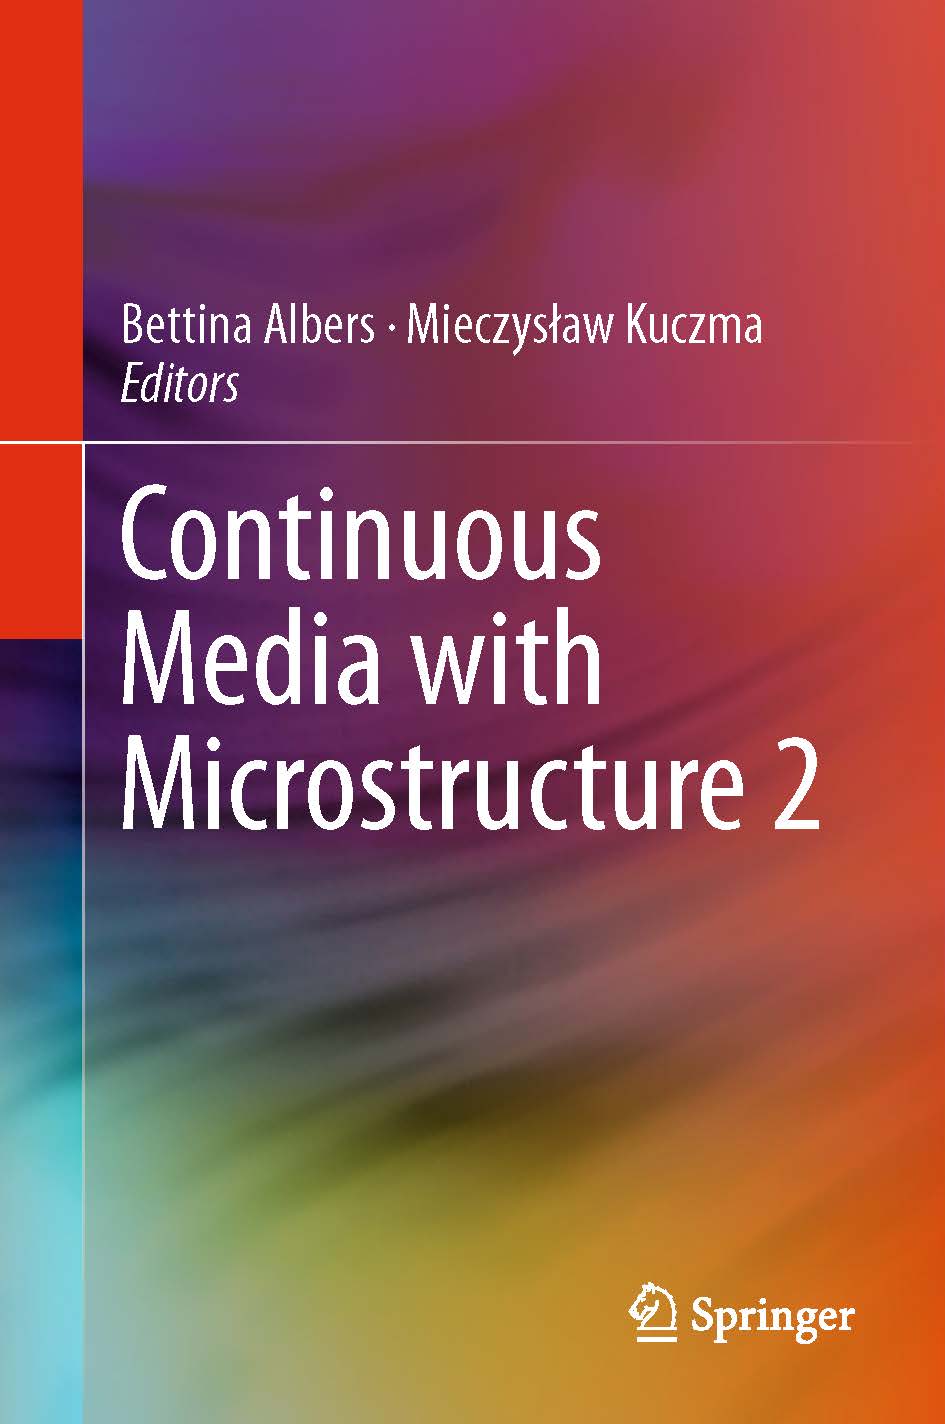 Continuous+Media+with+Microstructure+2_T-page.jpg